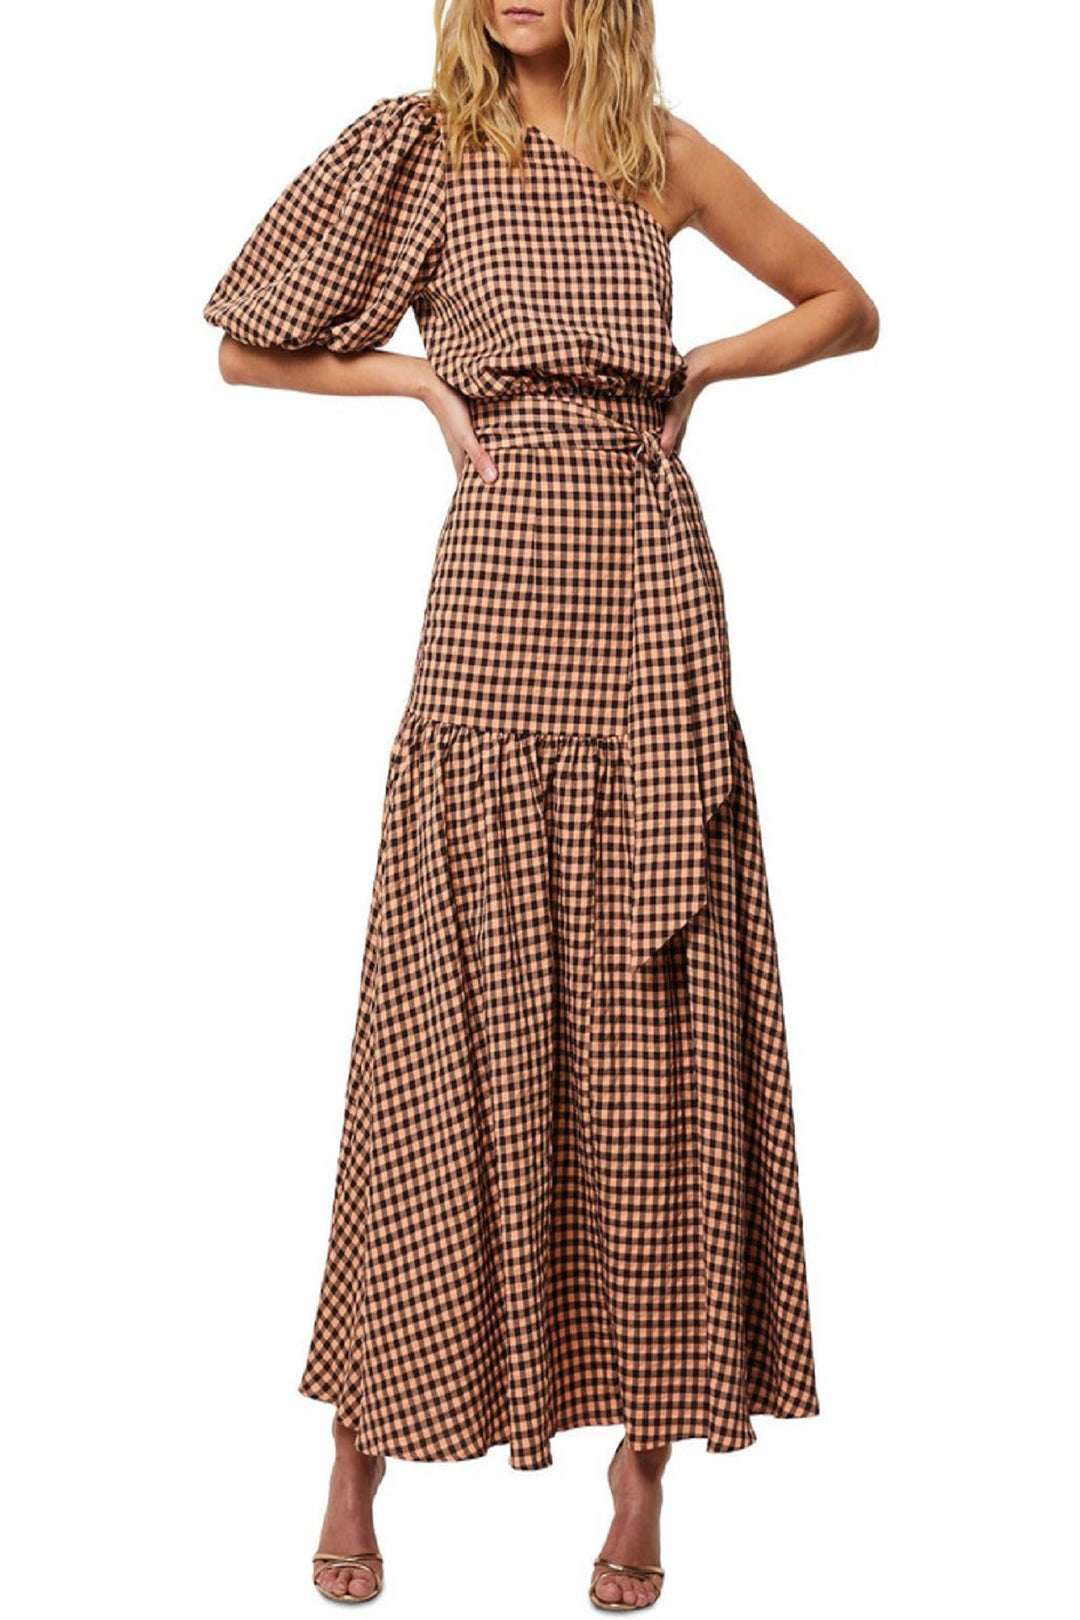 The Checked Out Maxi Dress by Mossman